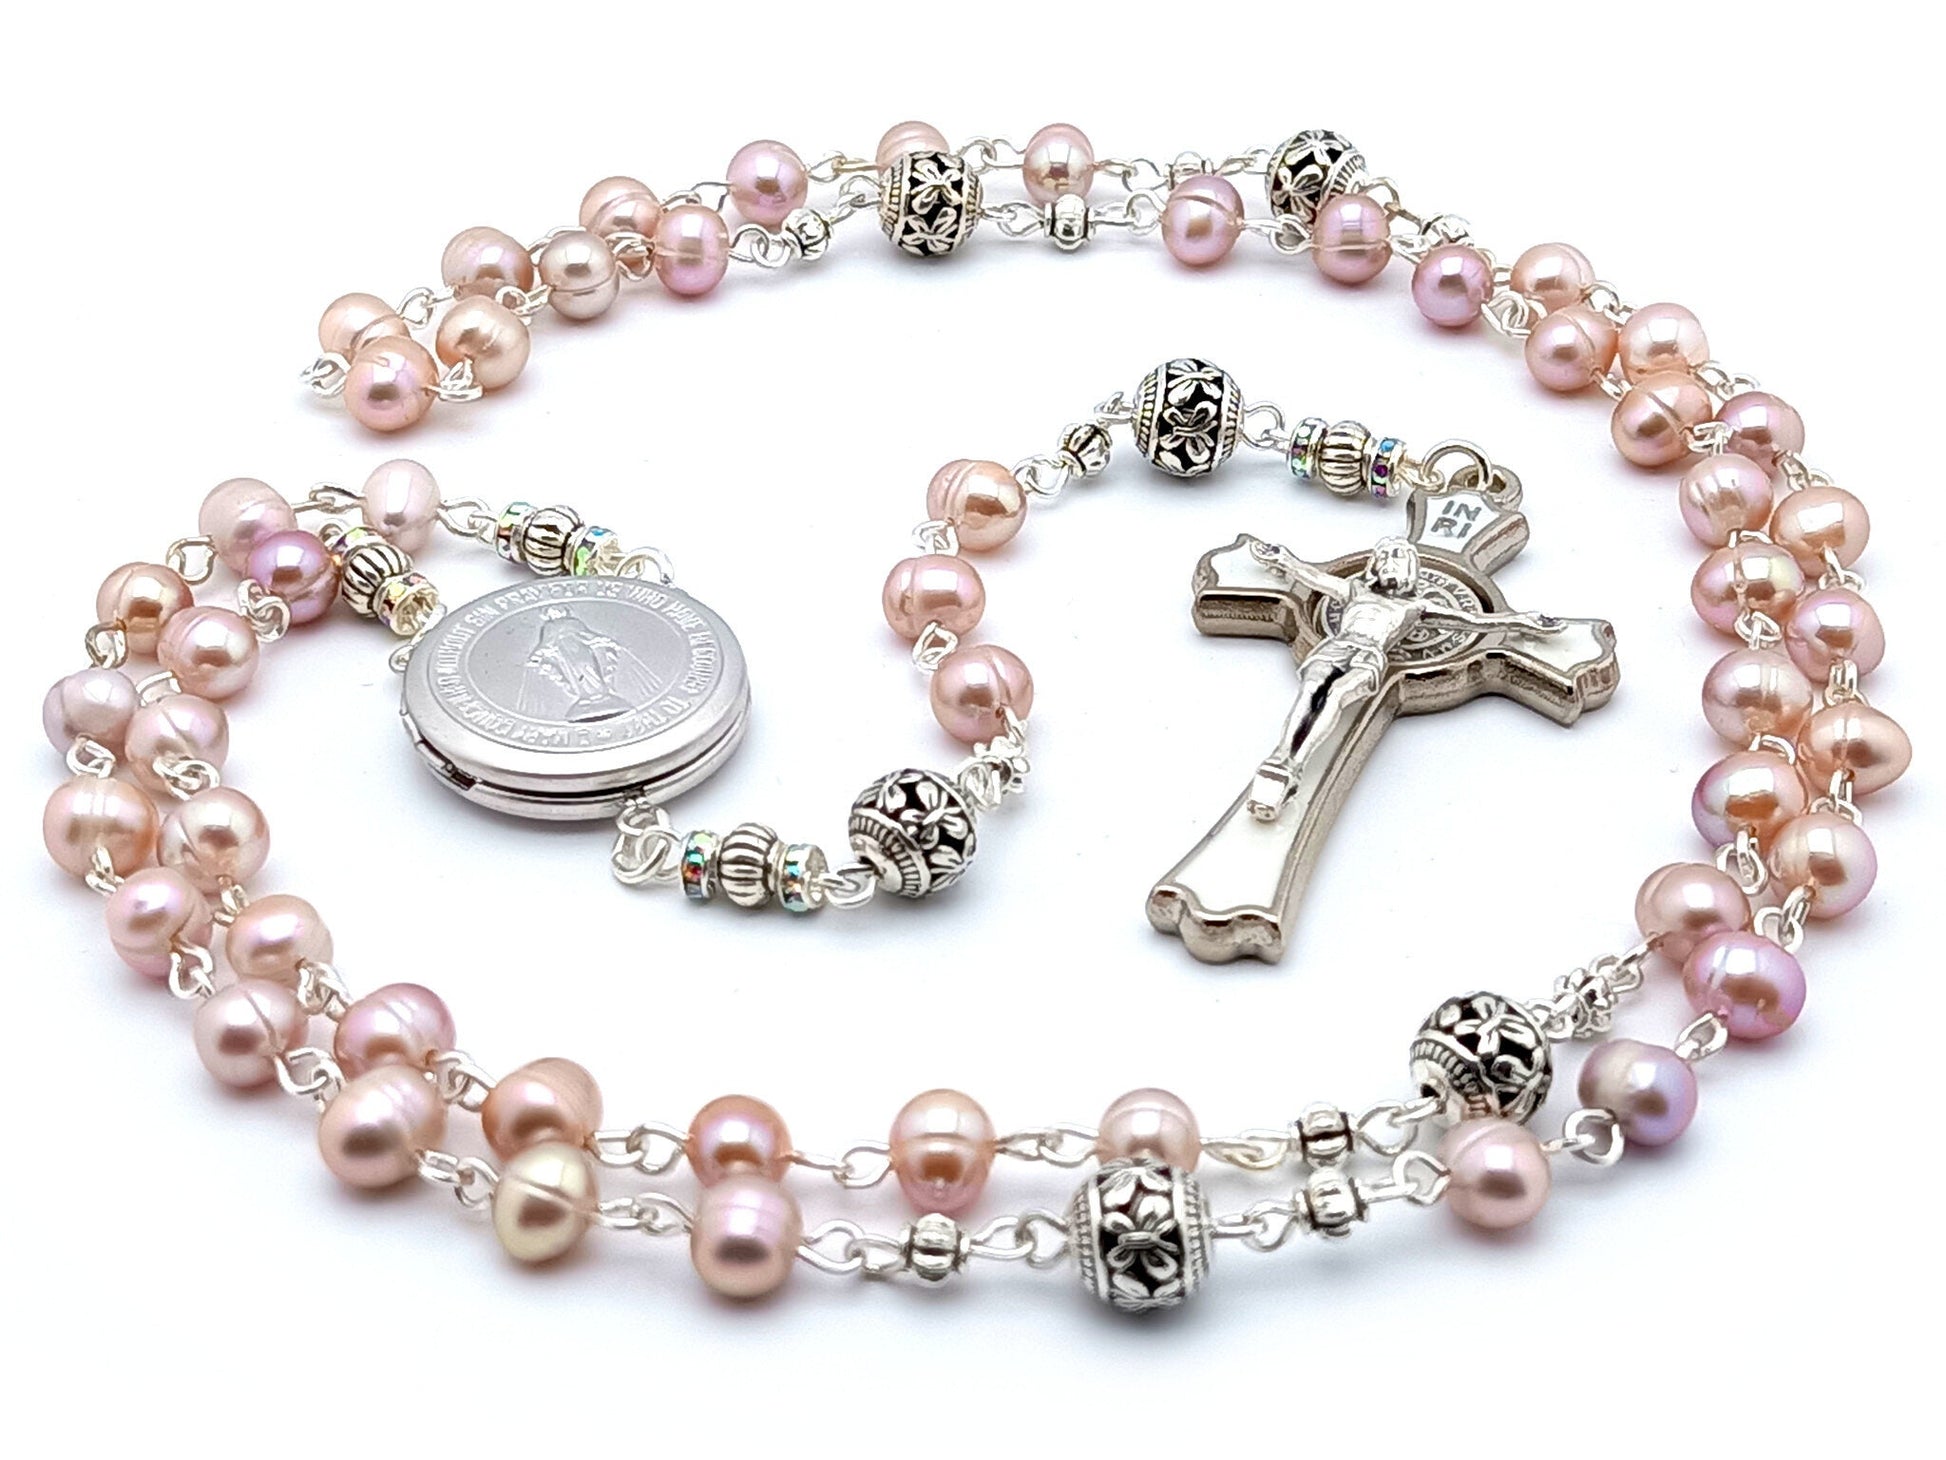 Miraculous medal unique rosary beads with freshwater pearl and silver beads with Saint Benedict crucifix and silver centre medal.